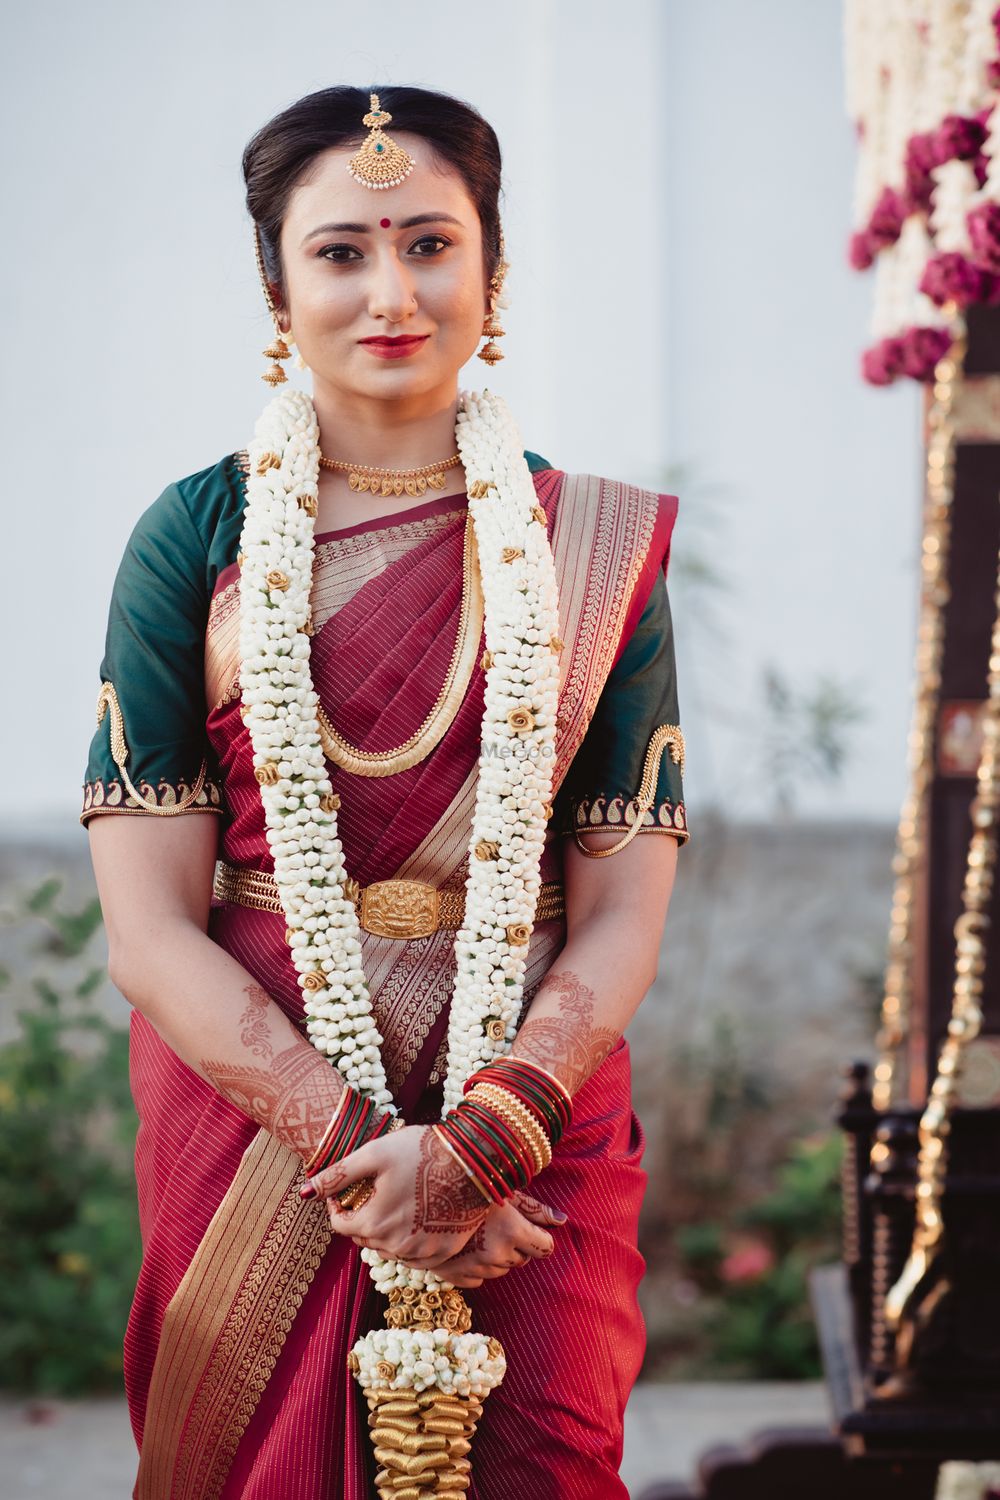 Photo of South Indian bride dressed in a maroon saree with a dark green blouse.